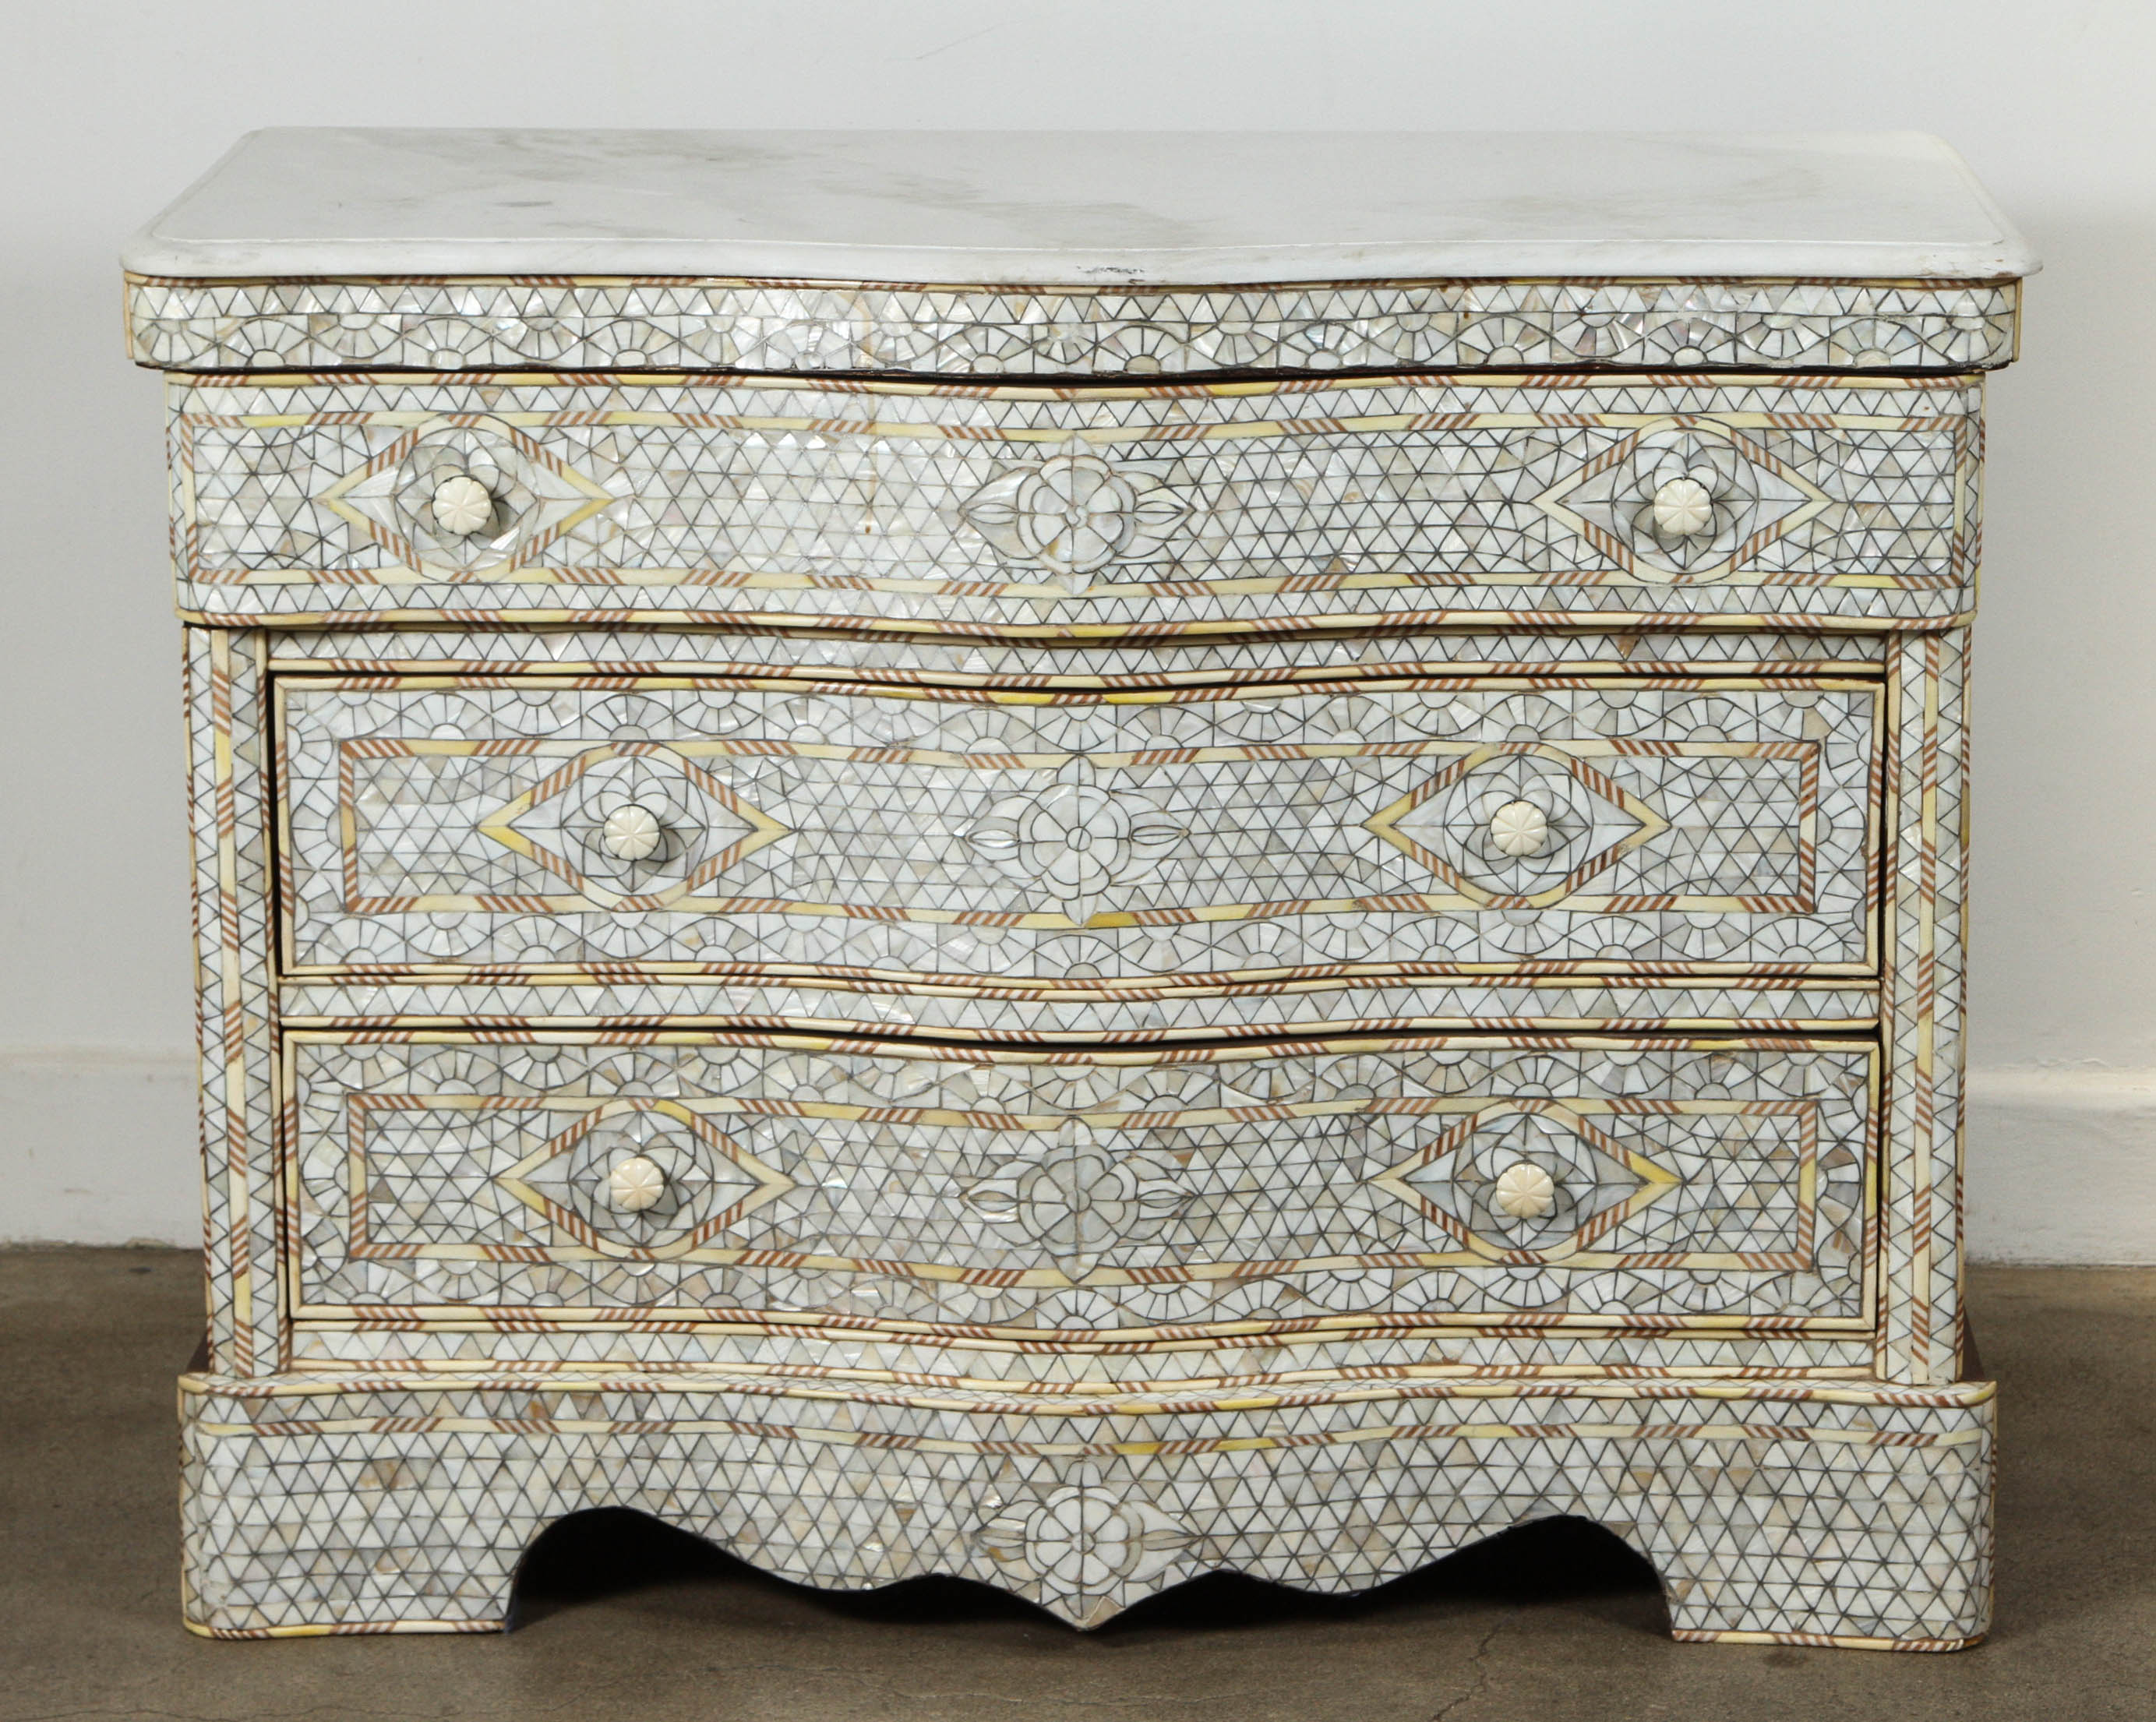 Syrian Mother of Pearl Inlay Chest of Drawers